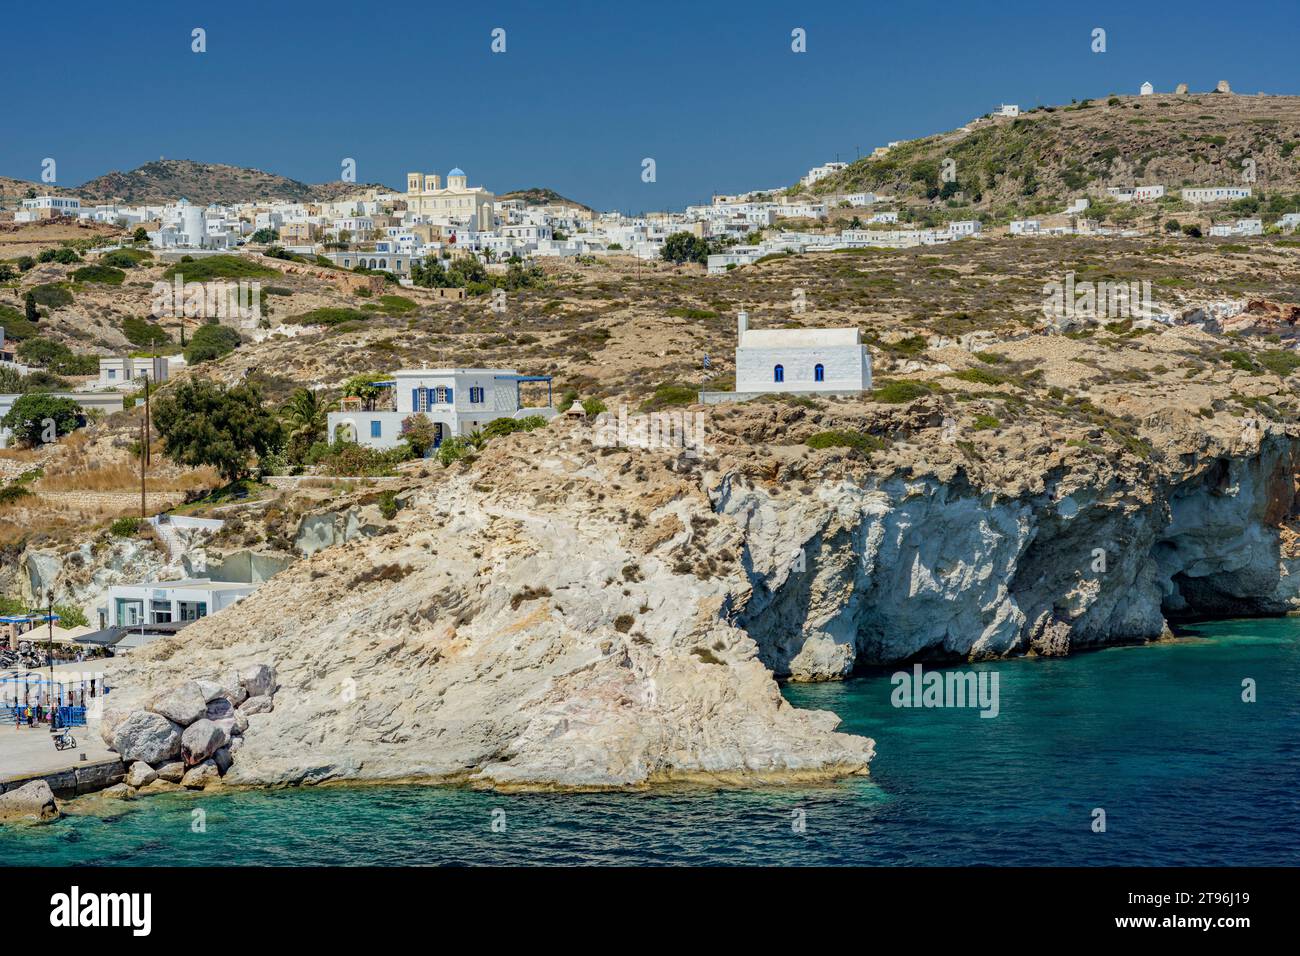 Coastal view of Kimolos island with Chorio village perched on the hill Stock Photo